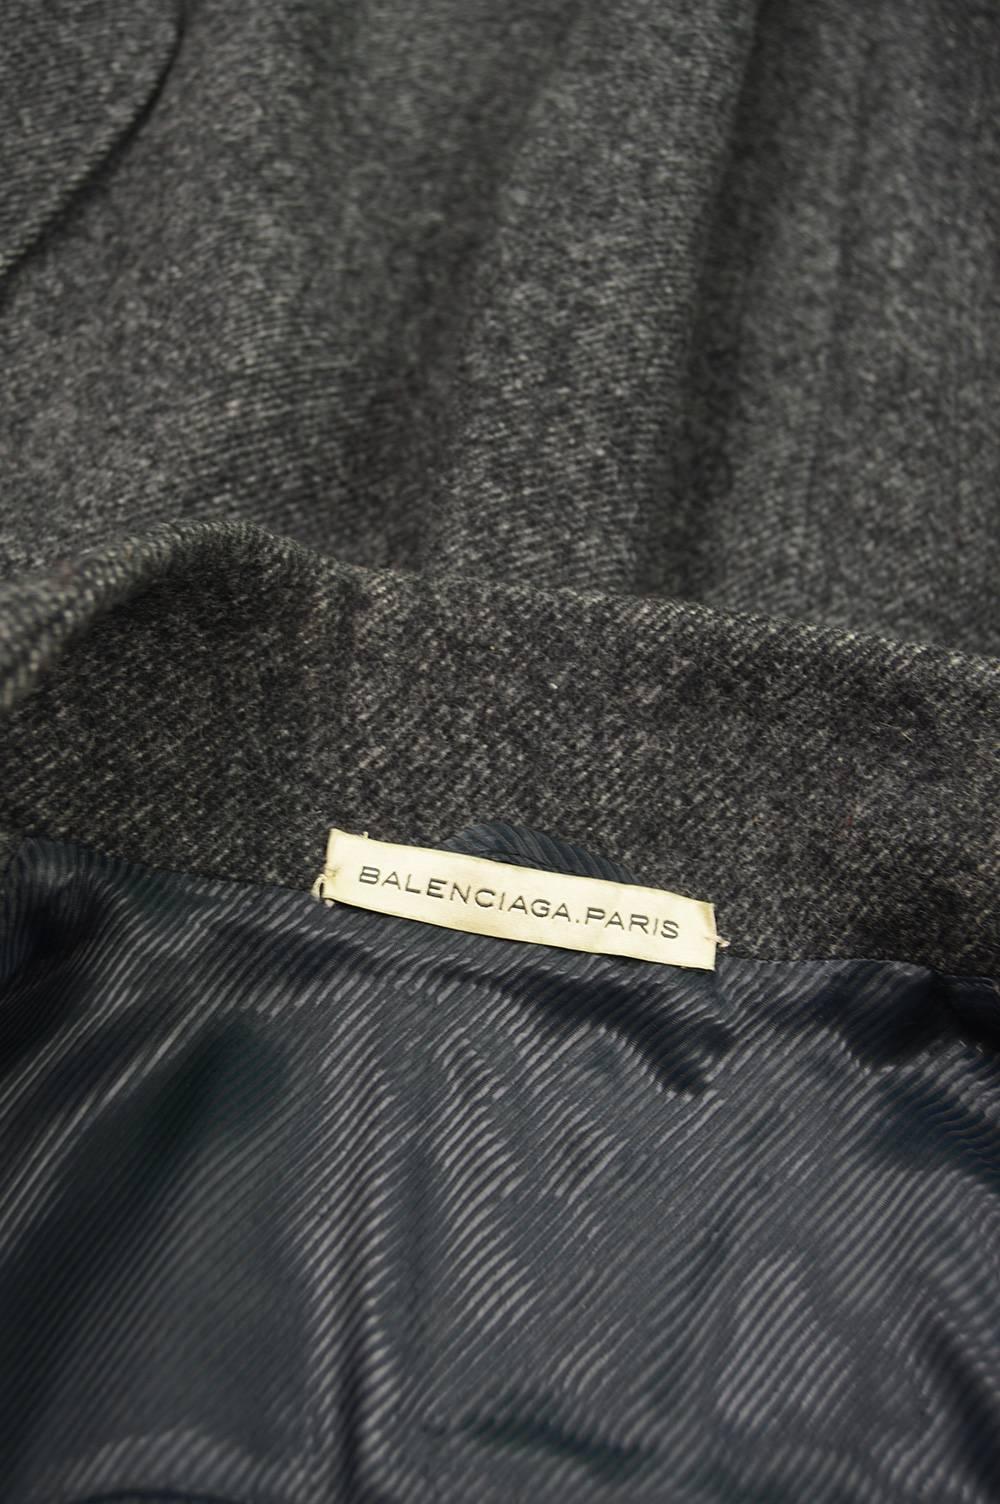 Balenciaga Nicolas Ghesquiere Gray Wool and Cashmere Military Style Coat, 2005 4